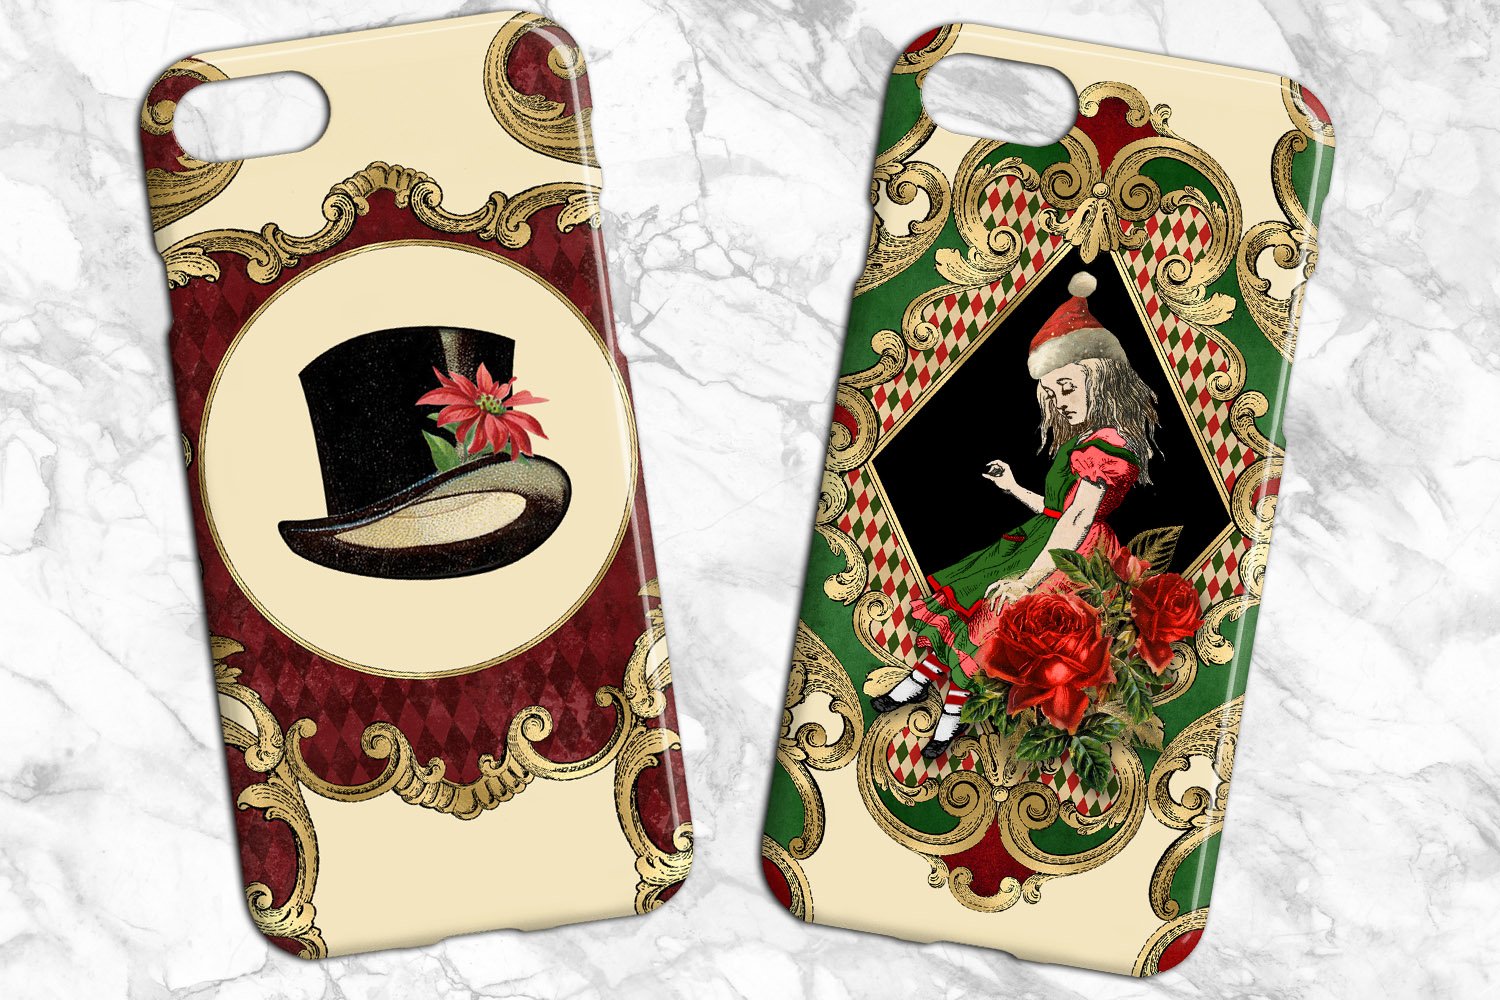 Great prints on phone cases.